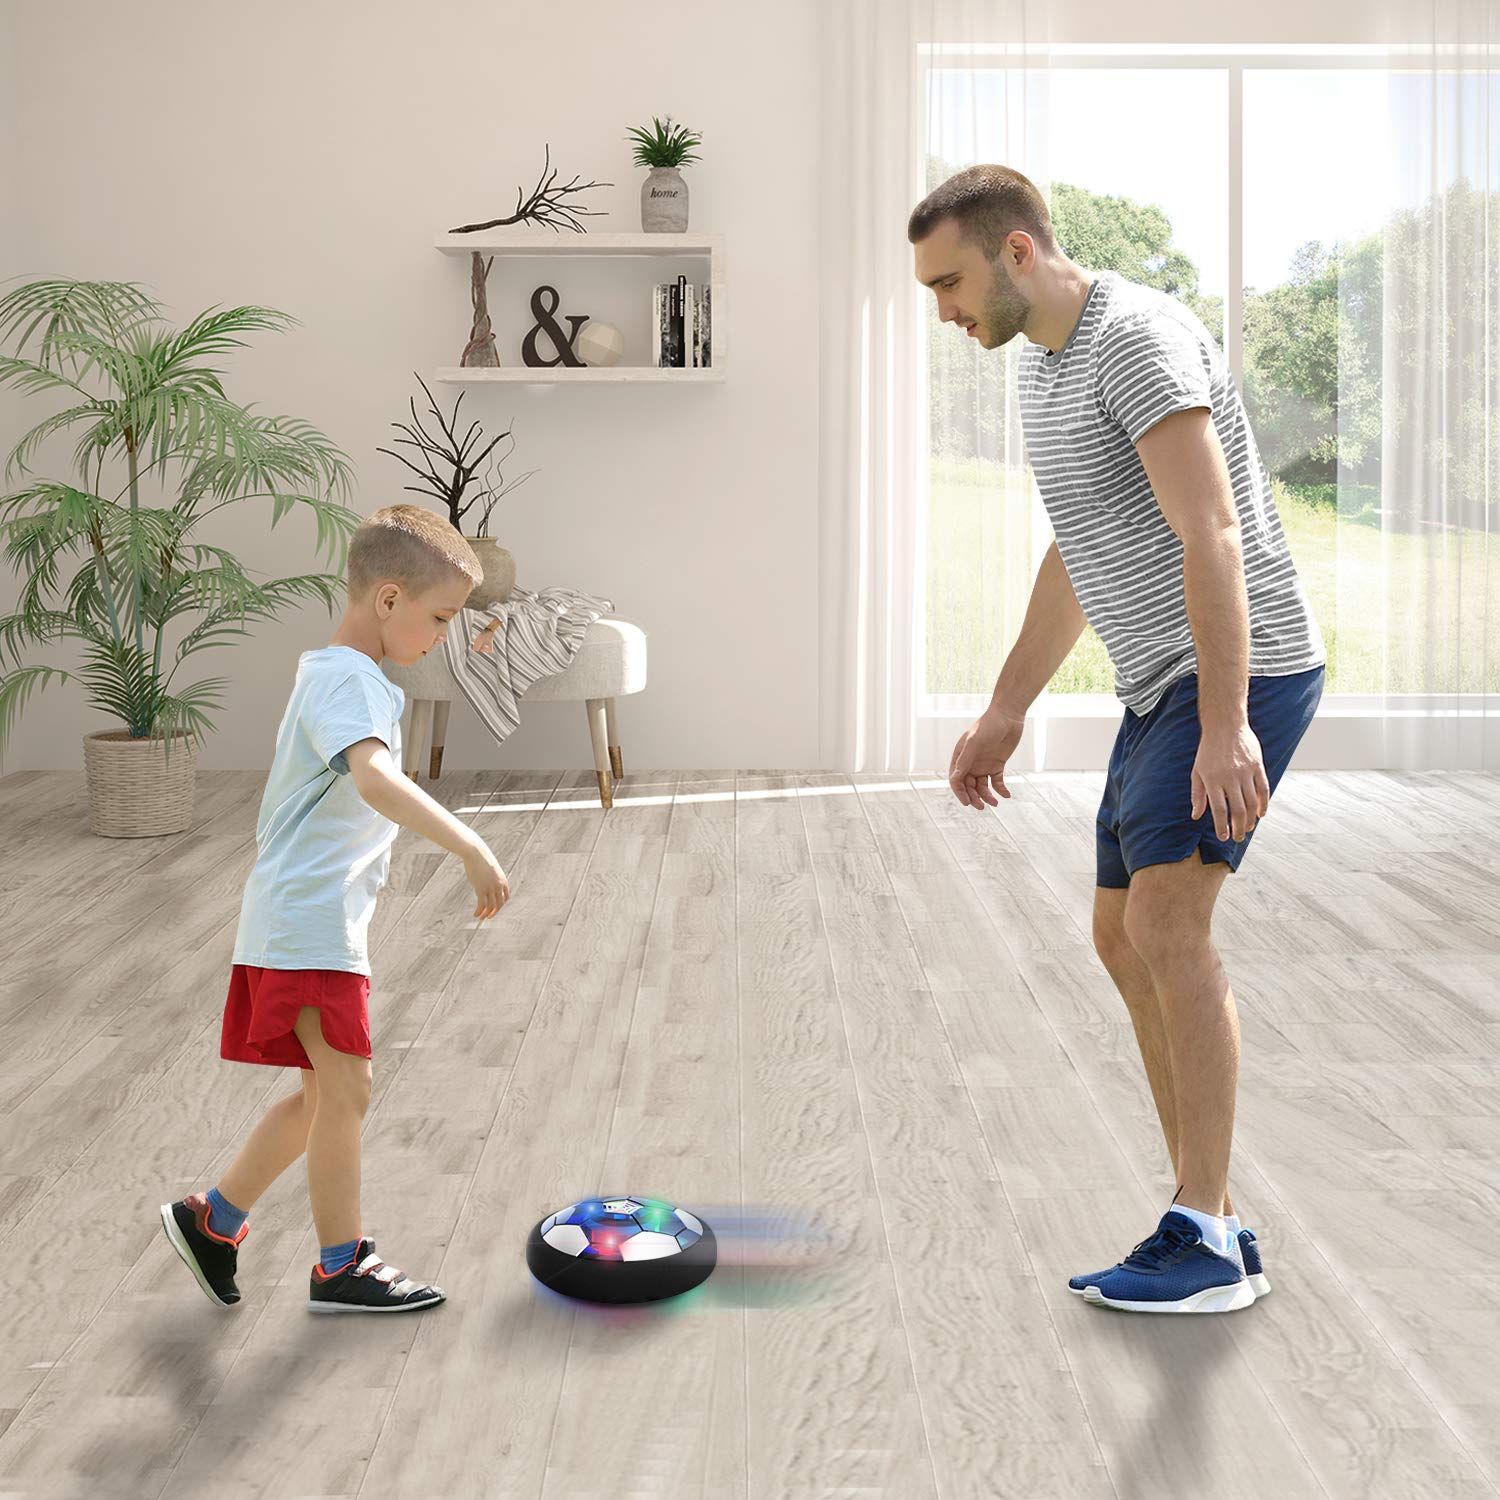 Hover Soccer Ball Boy Toys, Indoor Floating Rechargeable Soccer with Colorful LED Light and Soft Foam Bumper, Upgrade Air Training Soccer Ball for 3 4 5 6 7 8-16 Years Old Boys Girls Adults